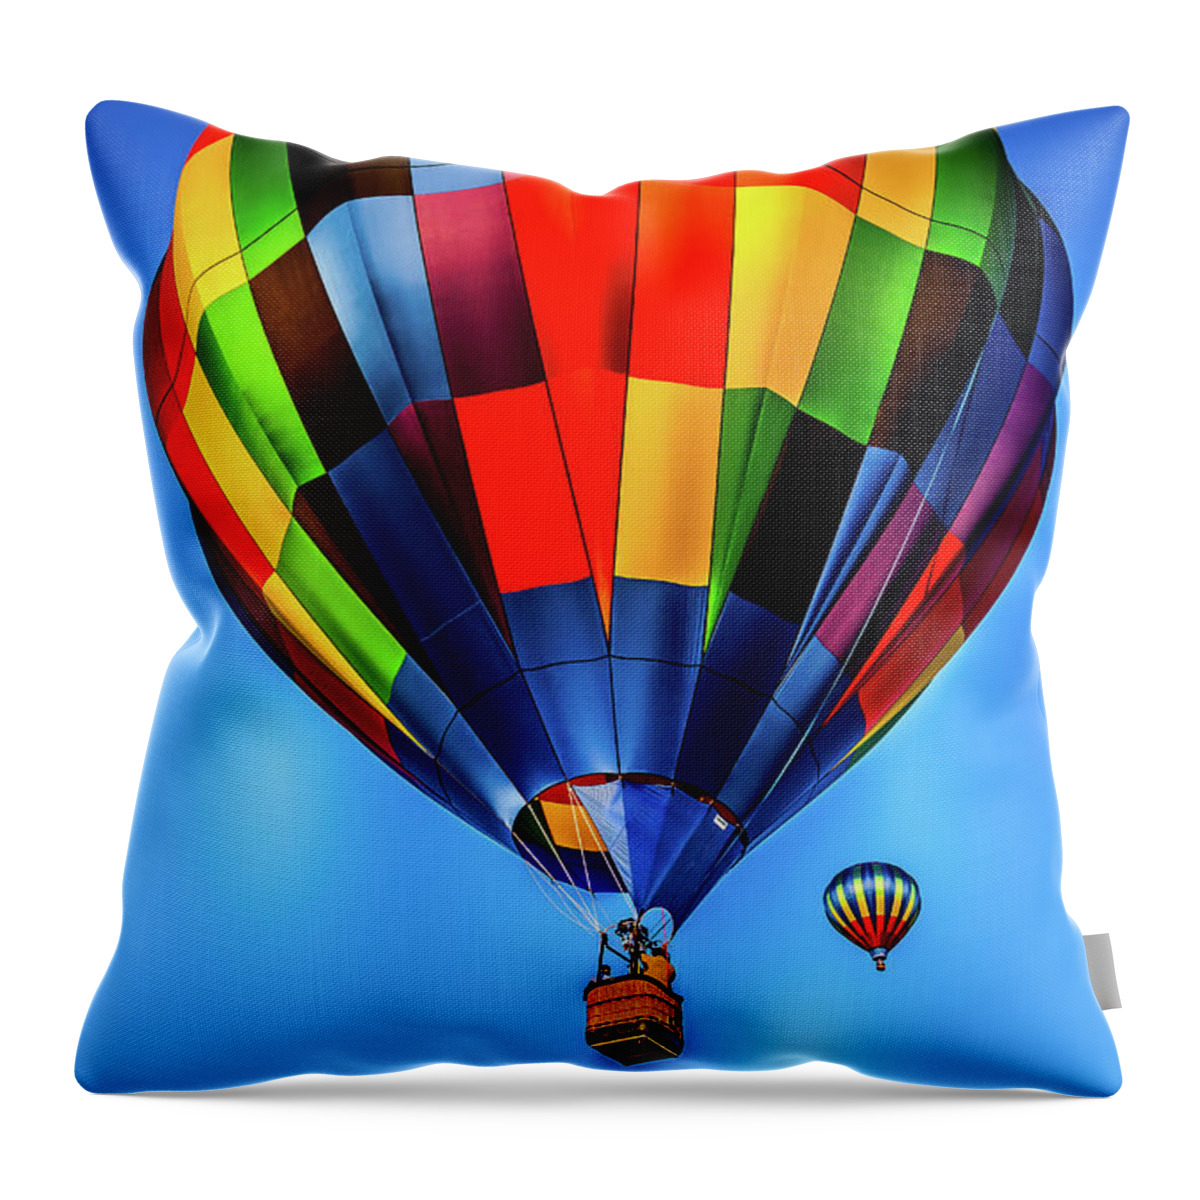 The Hot Air Balloons Throw Pillow featuring the photograph The Hot Air Balloons by David Patterson